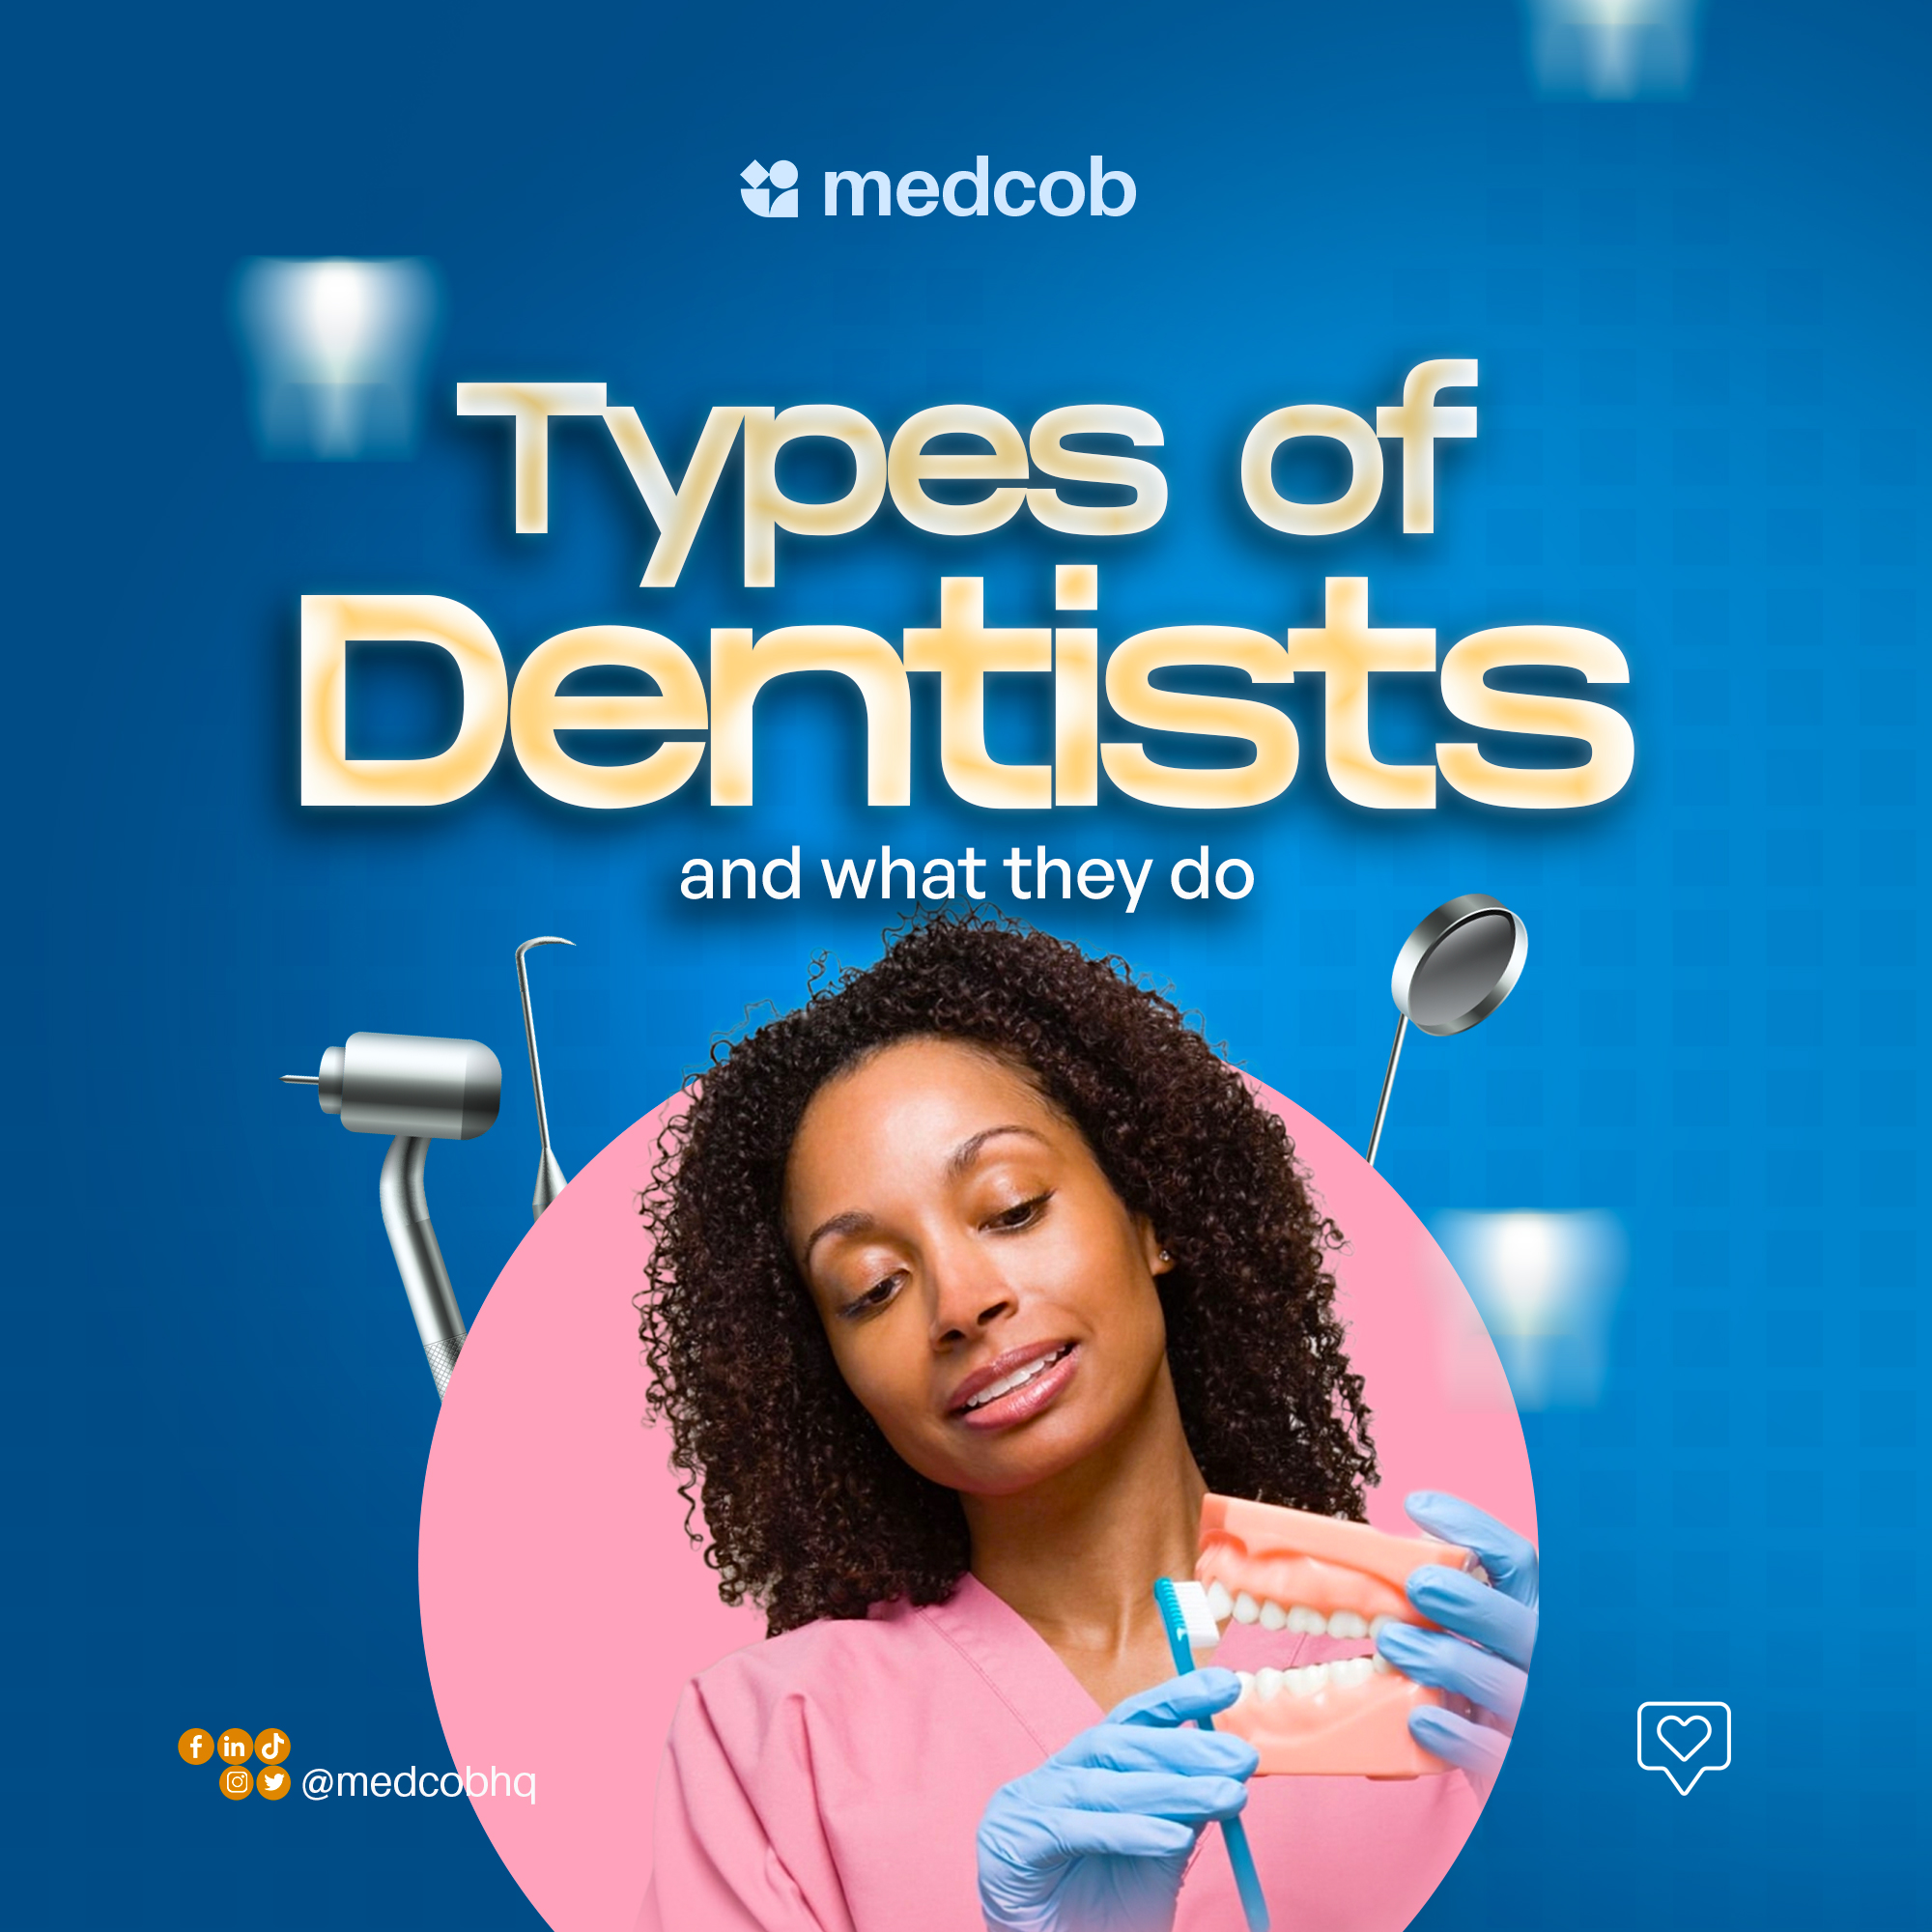 TYPES OF DENTISTS AND WHAT THEY DO